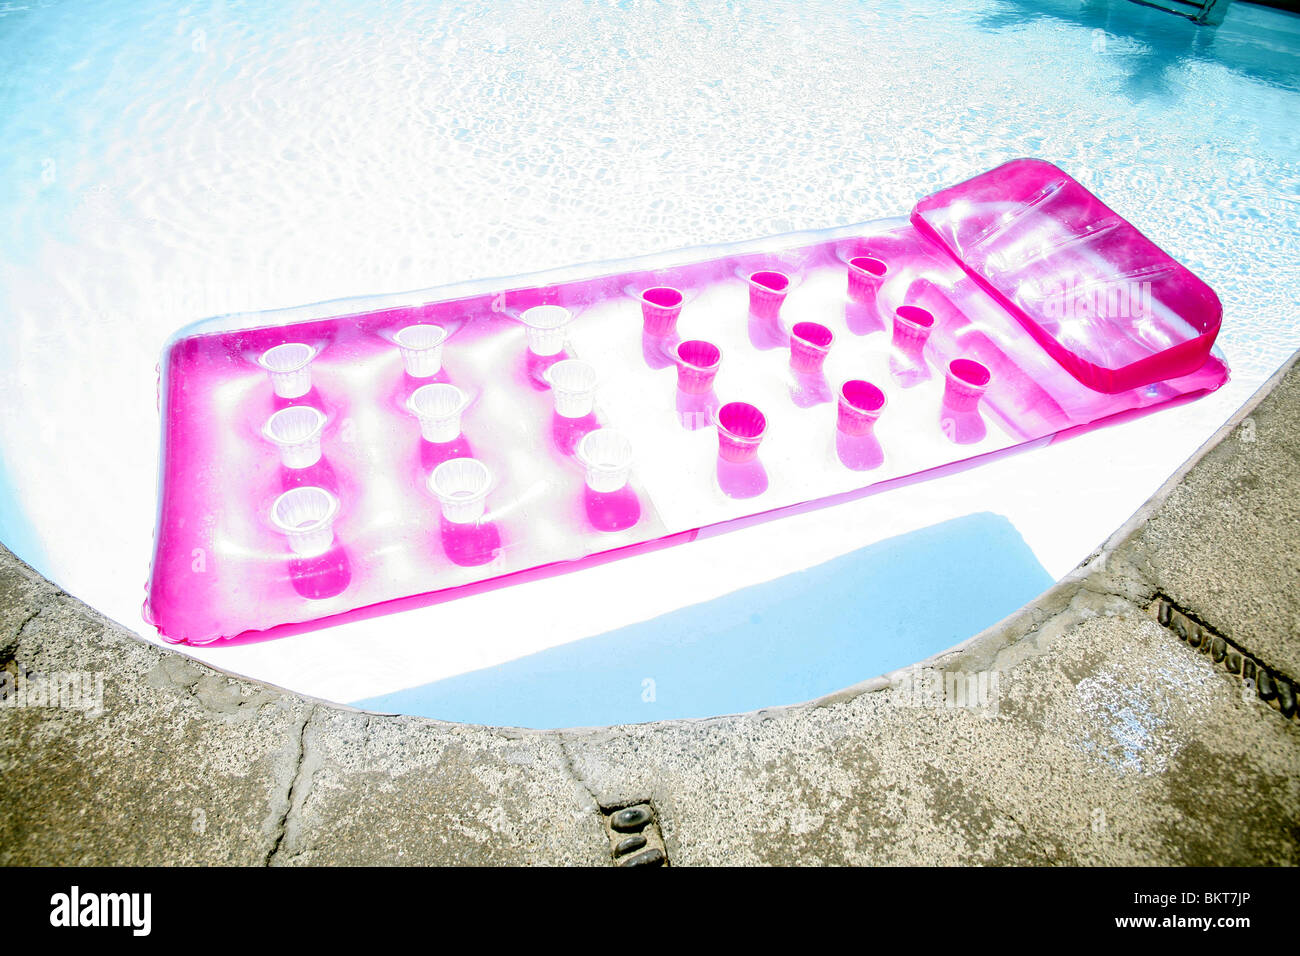 Pink airbed in a swimming pool Stock Photo